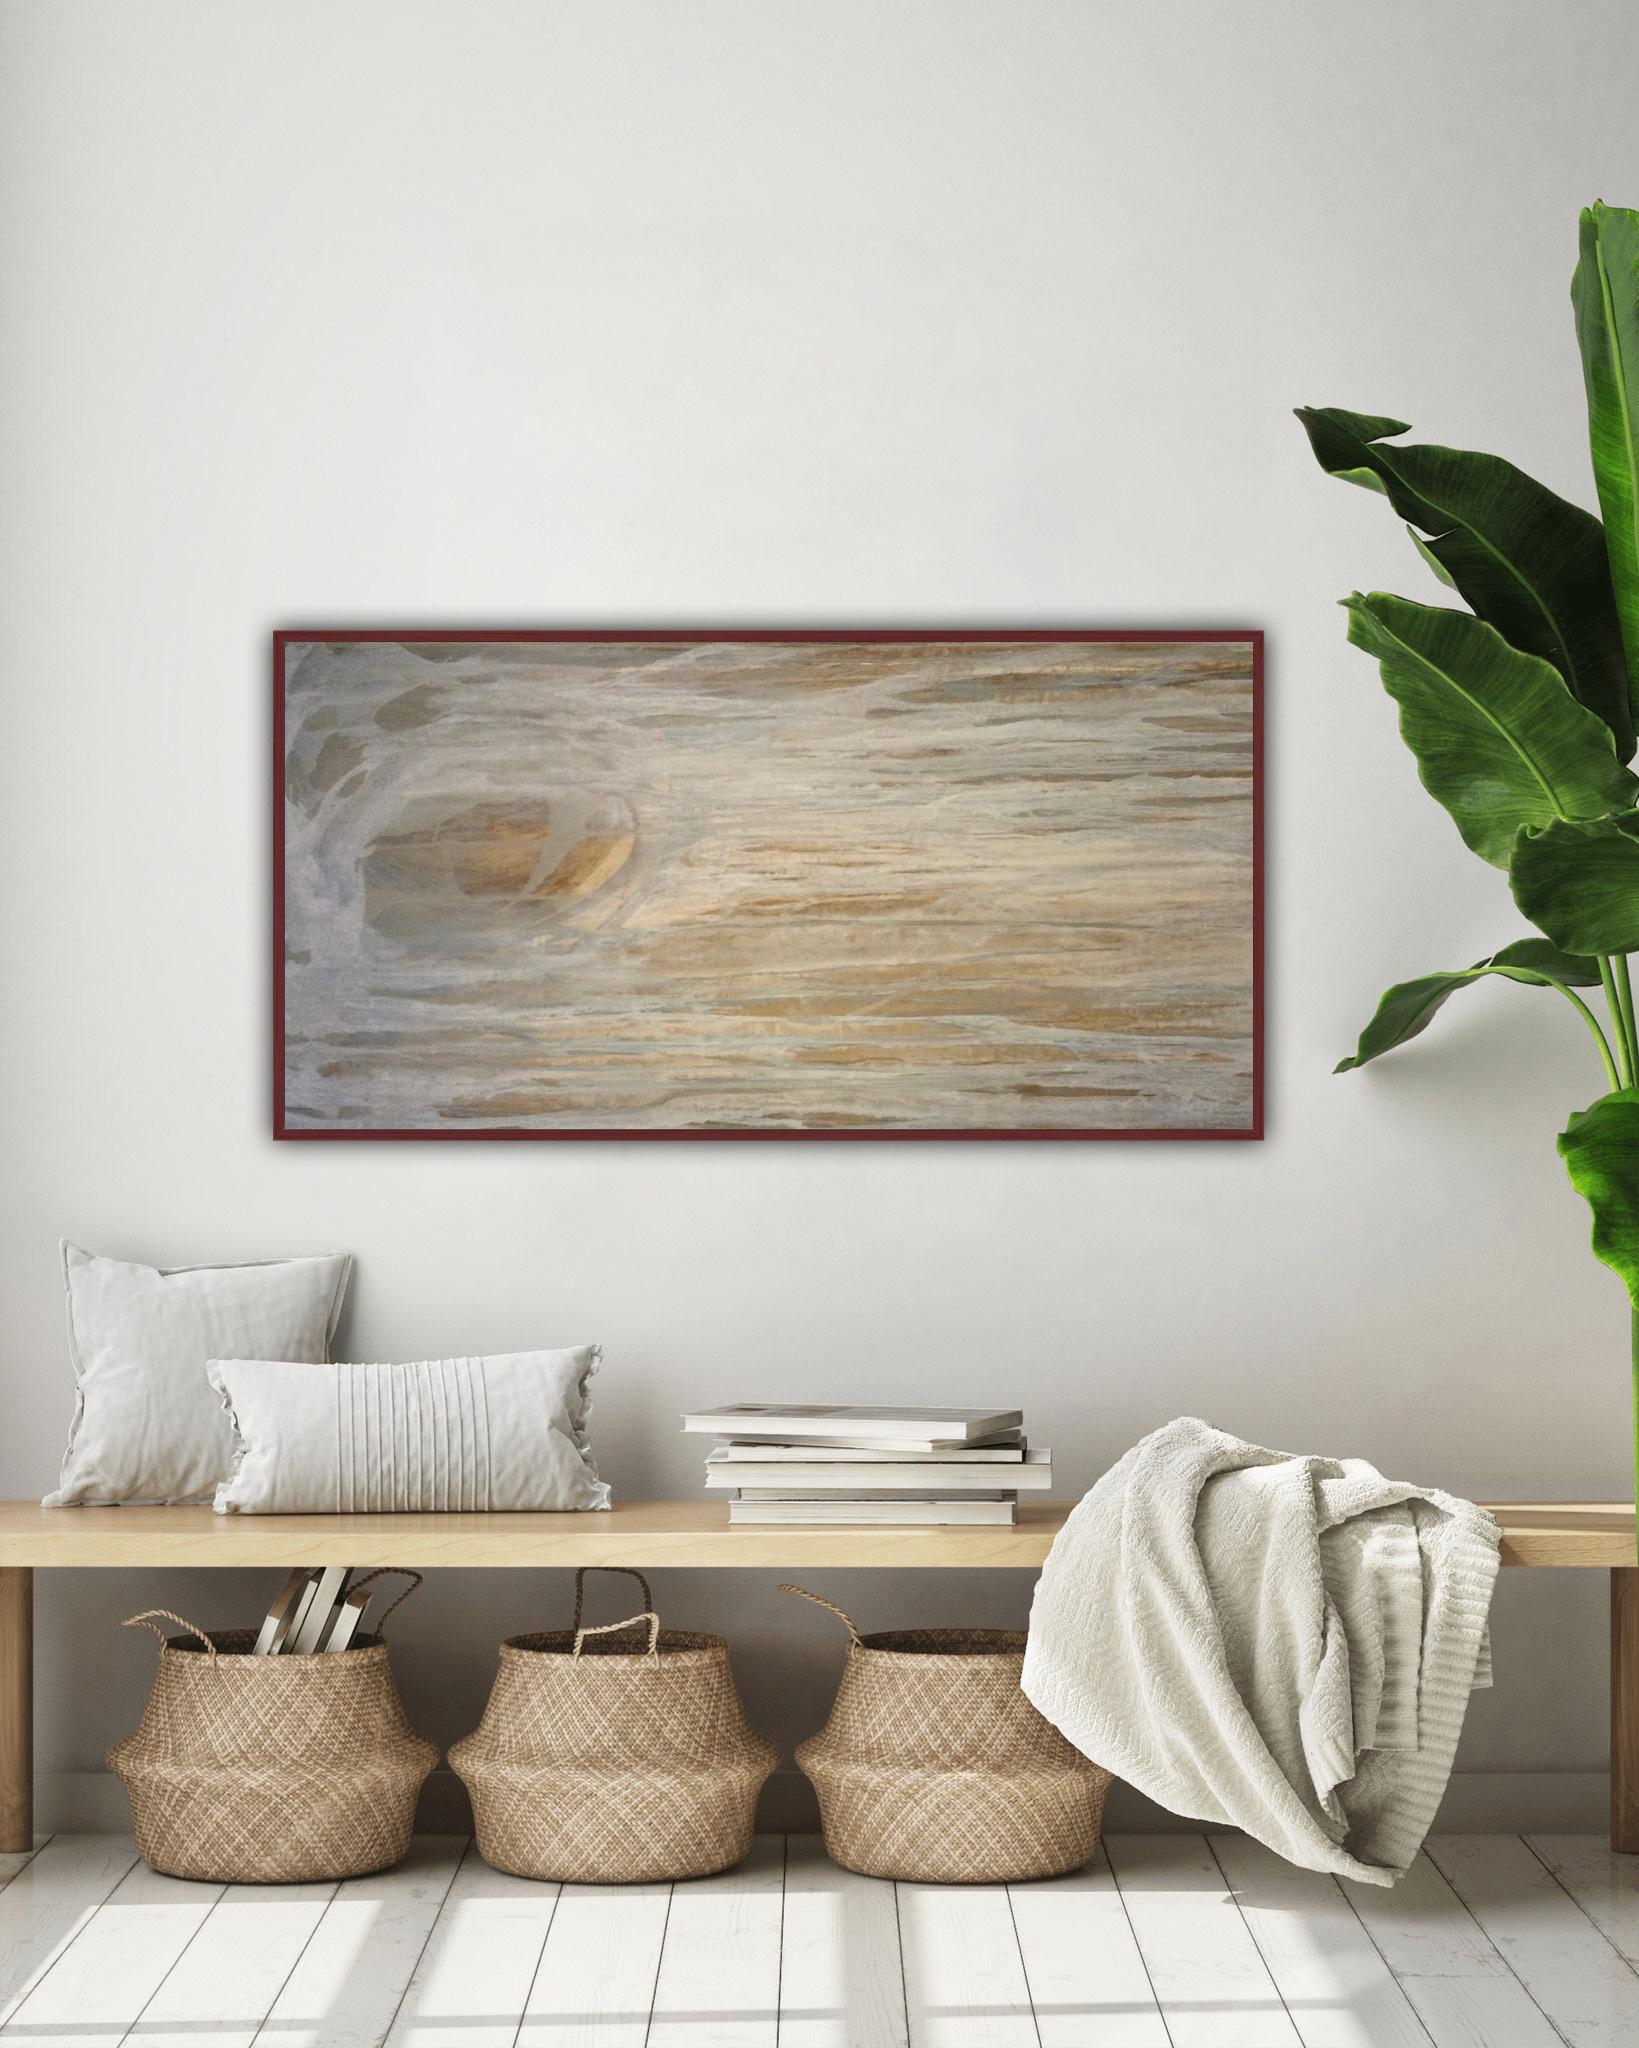 Zion 3 Contemporary Neutral Abstract Canvas Painting By Debra Ferrari 6